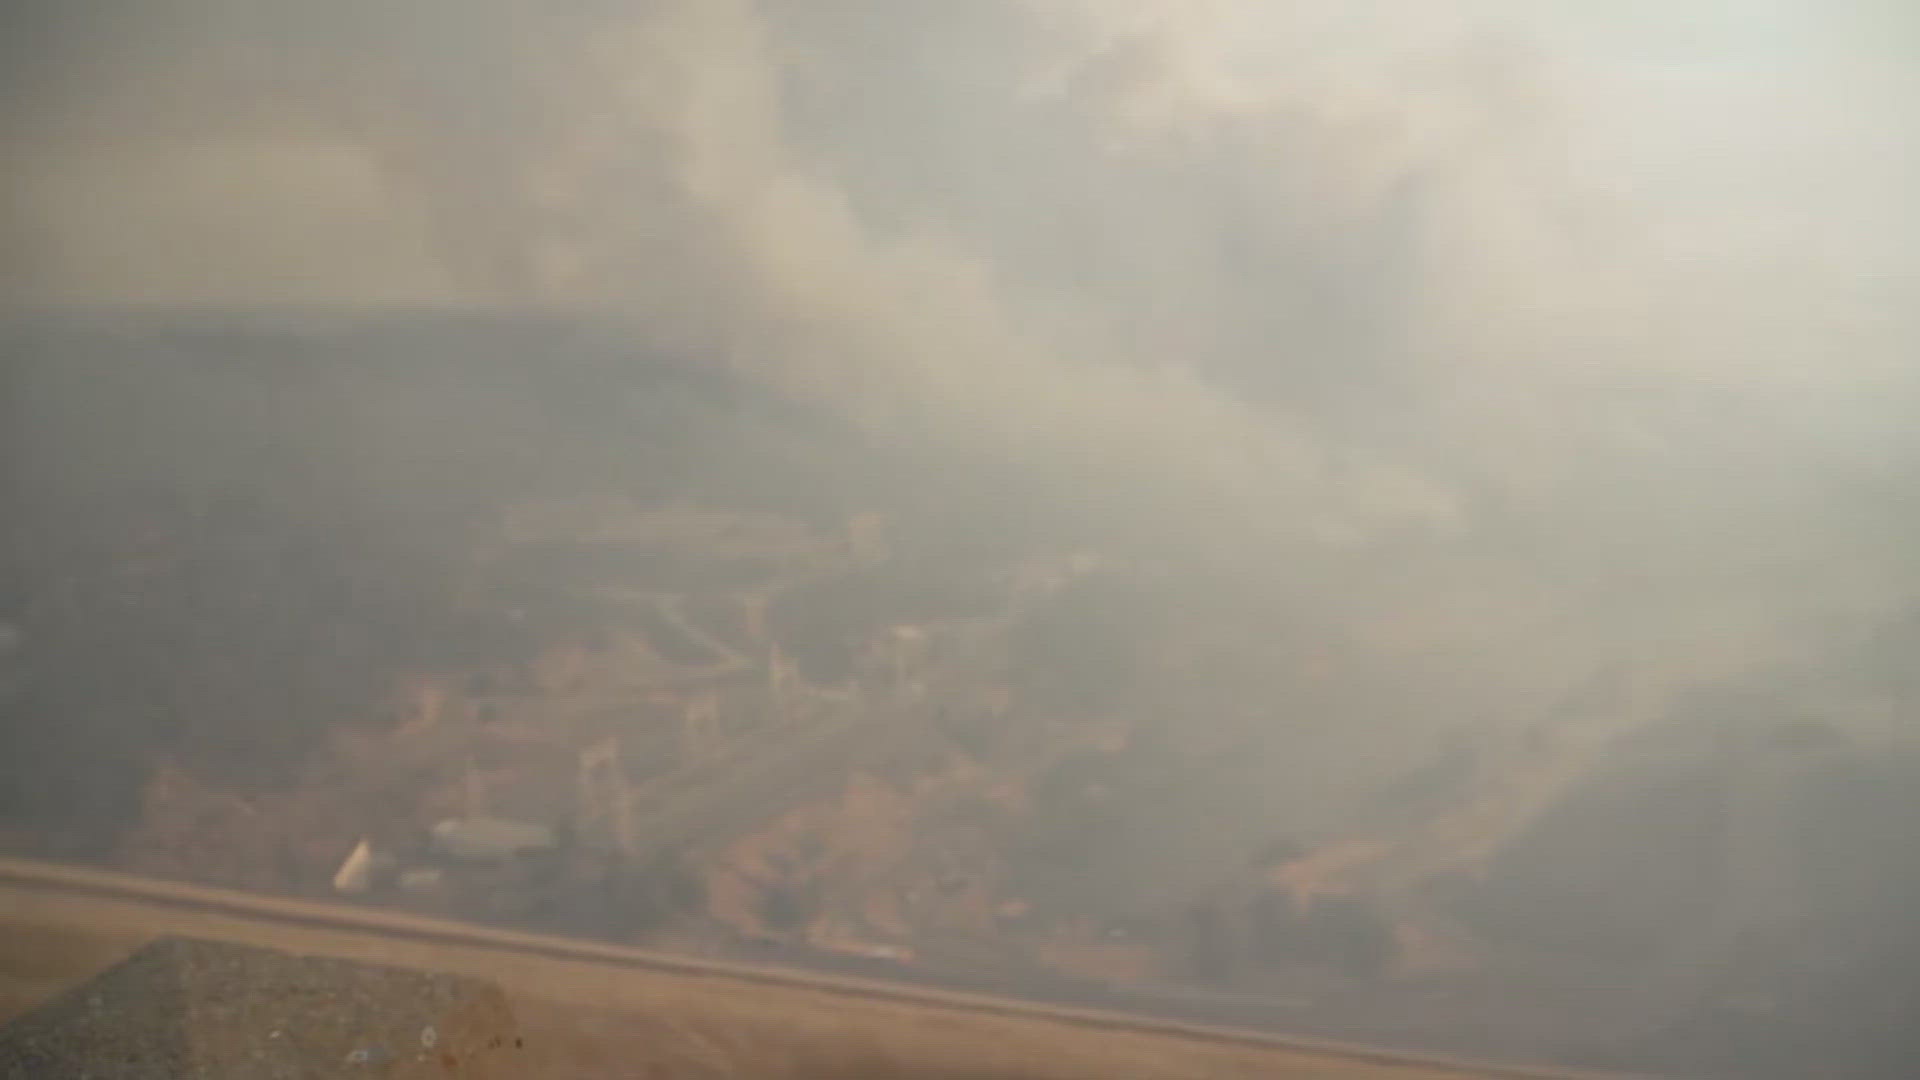 Cal Fire officials say the blaze has burned up more than 2,100 acres and forced nearly 13,000 people to evacuate.